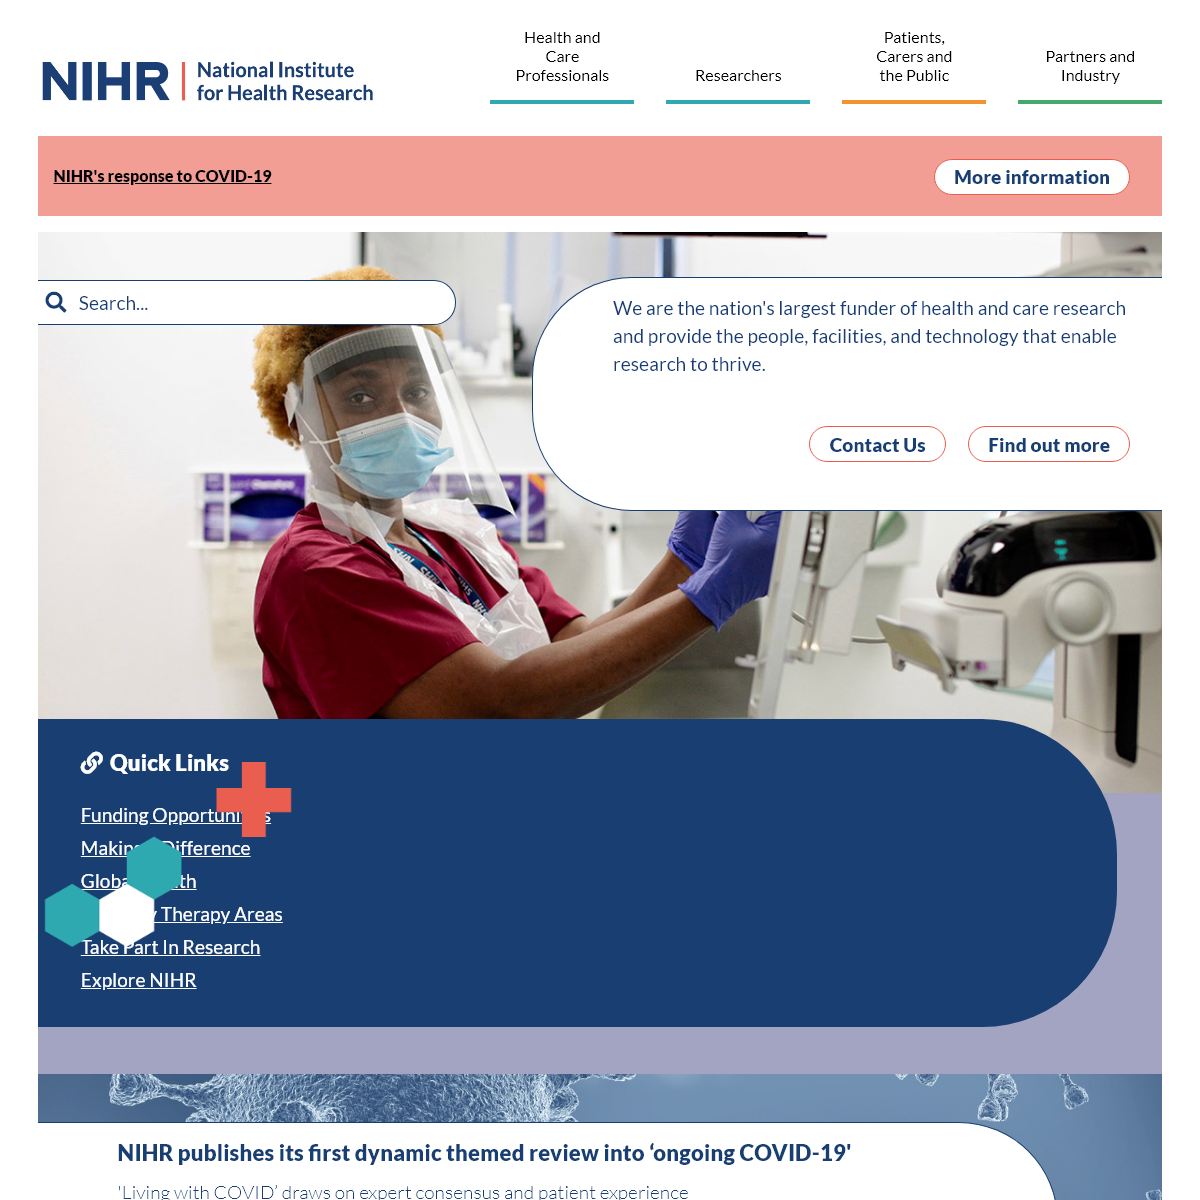 A complete backup of nihr.ac.uk